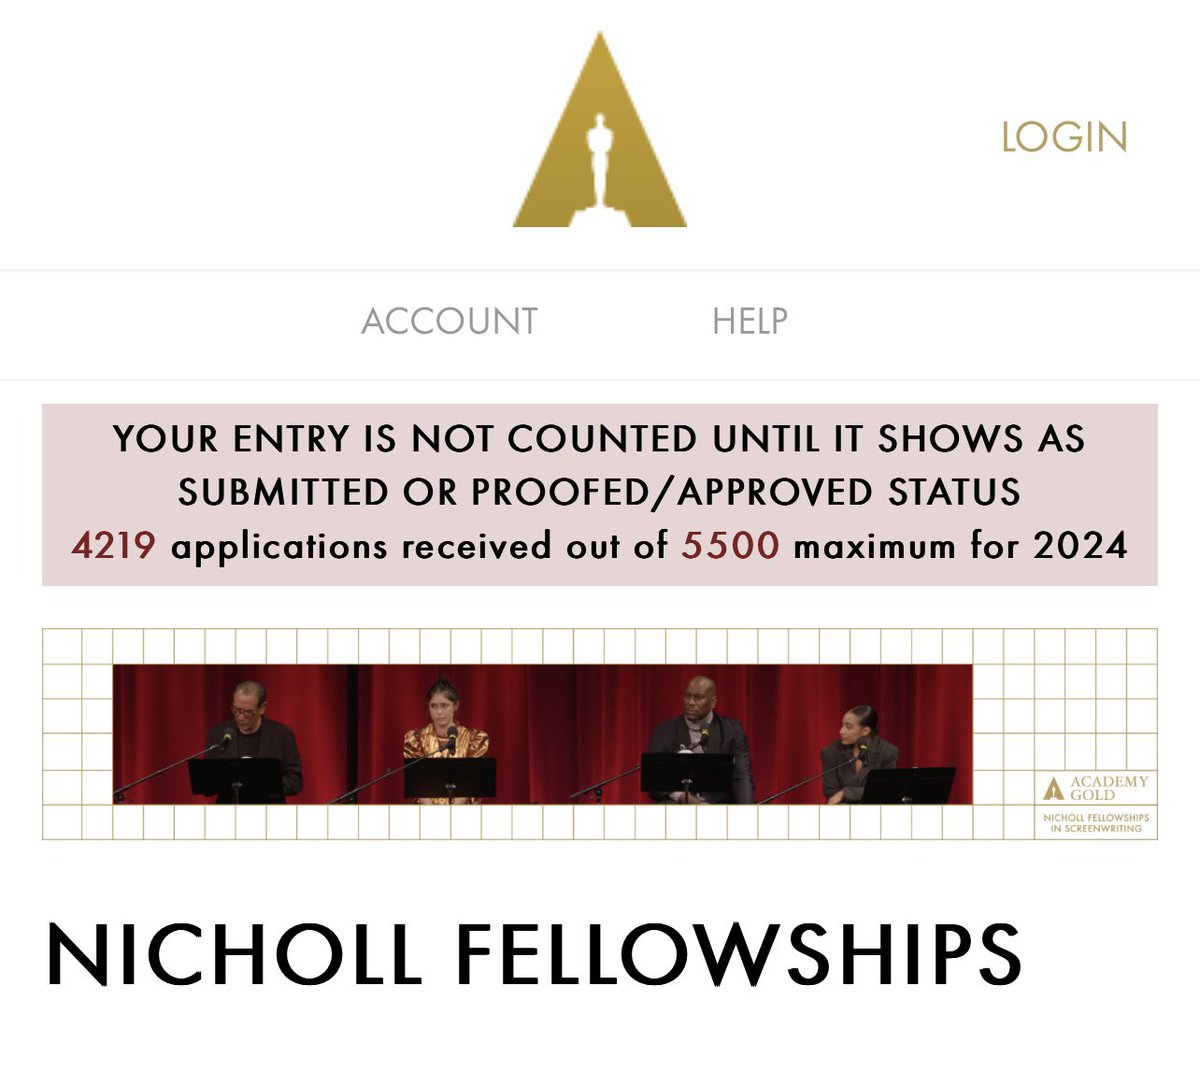 I’d love to sponsor a writer’s entry into The Nicholl Fellowship— If you’re stressed out, feeling rushed and strapped financially, I’d like to cover the late entry fee. Drop a comment about something positive in your life rn, either granular or grand 👇🏻📝